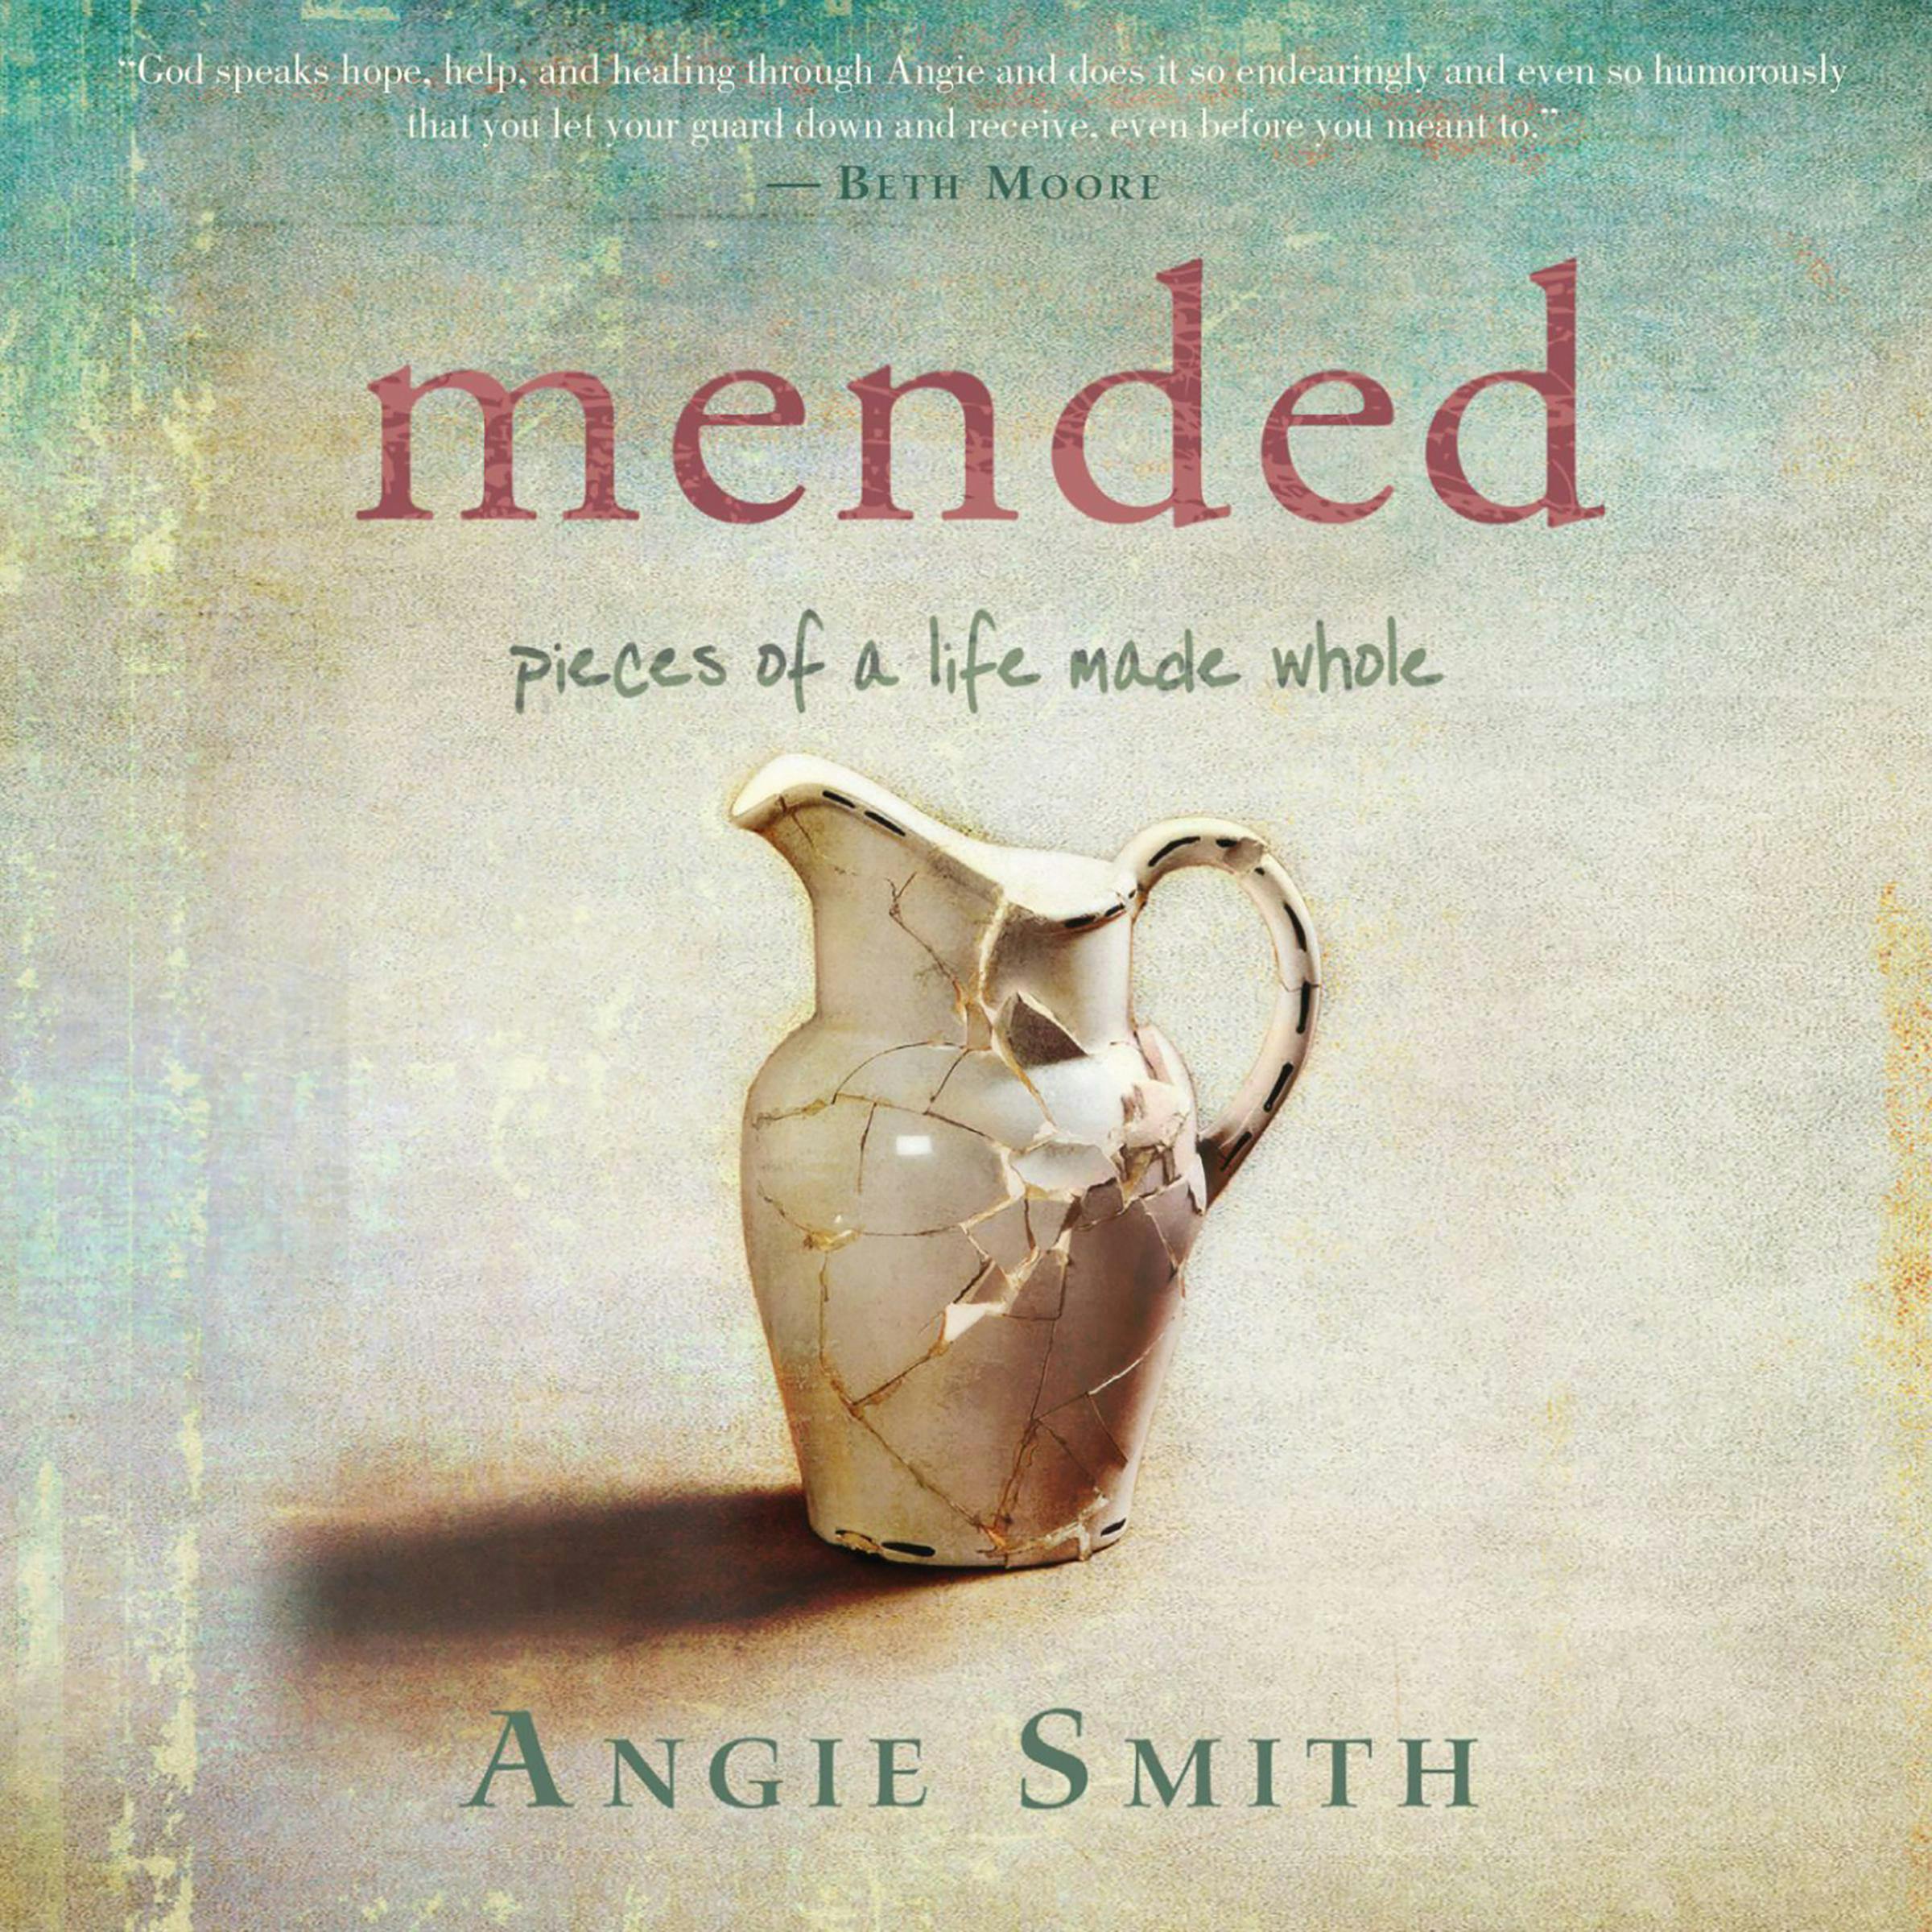 Mended: Pieces of a Life Made Whole - Angie Smith